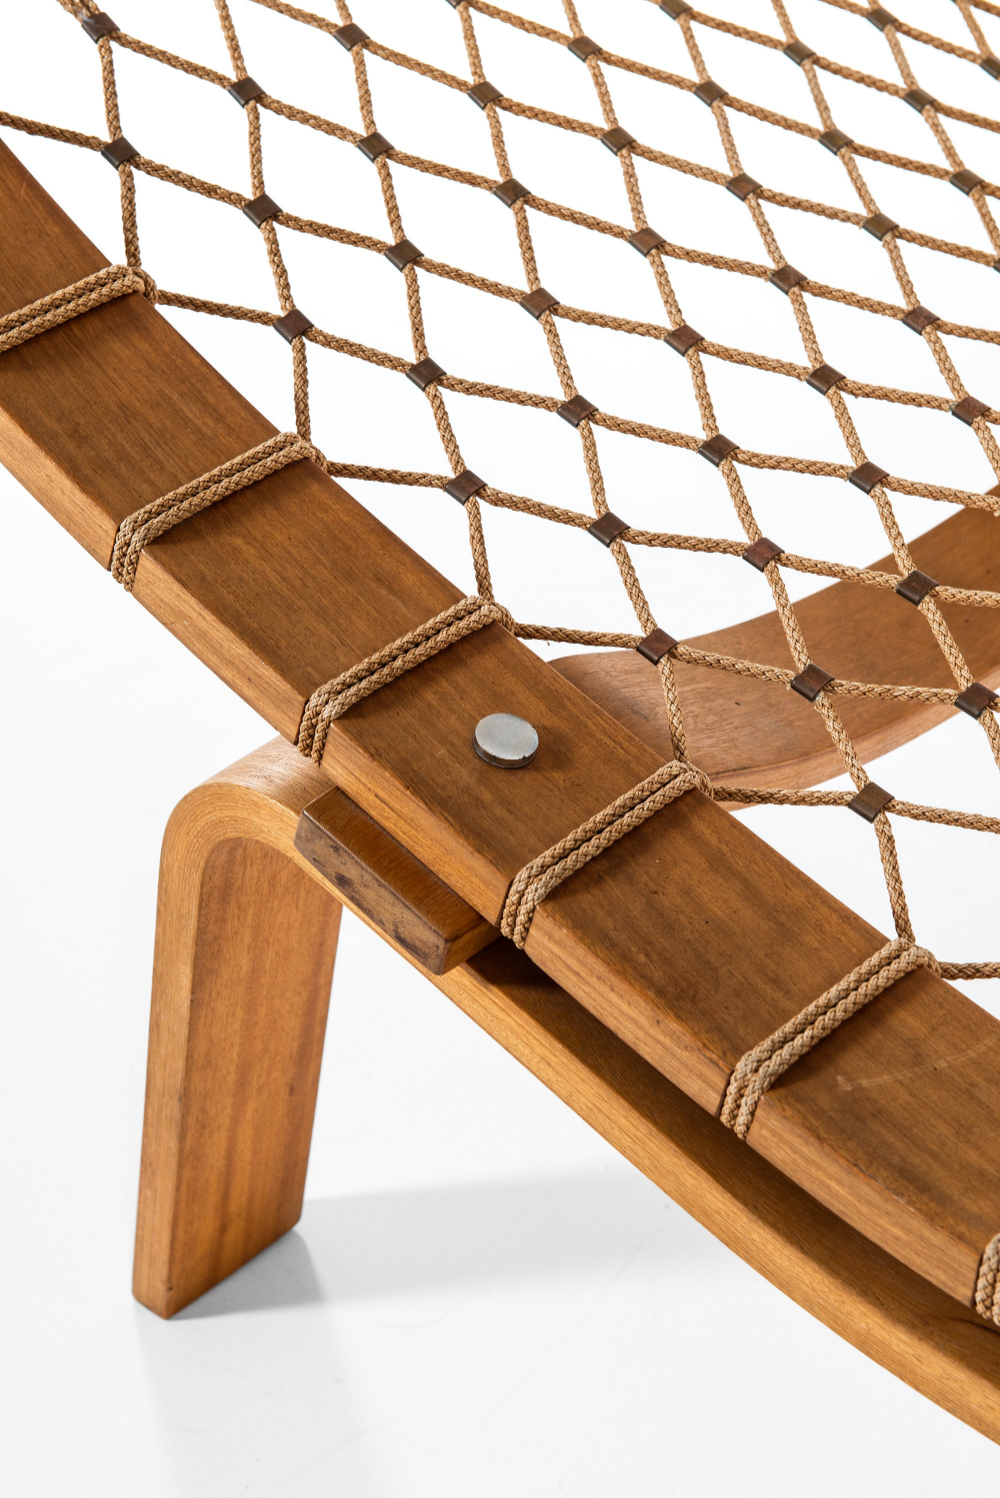 Relax in Style: Hammock Chairs for Indoor and Outdoor Comfort